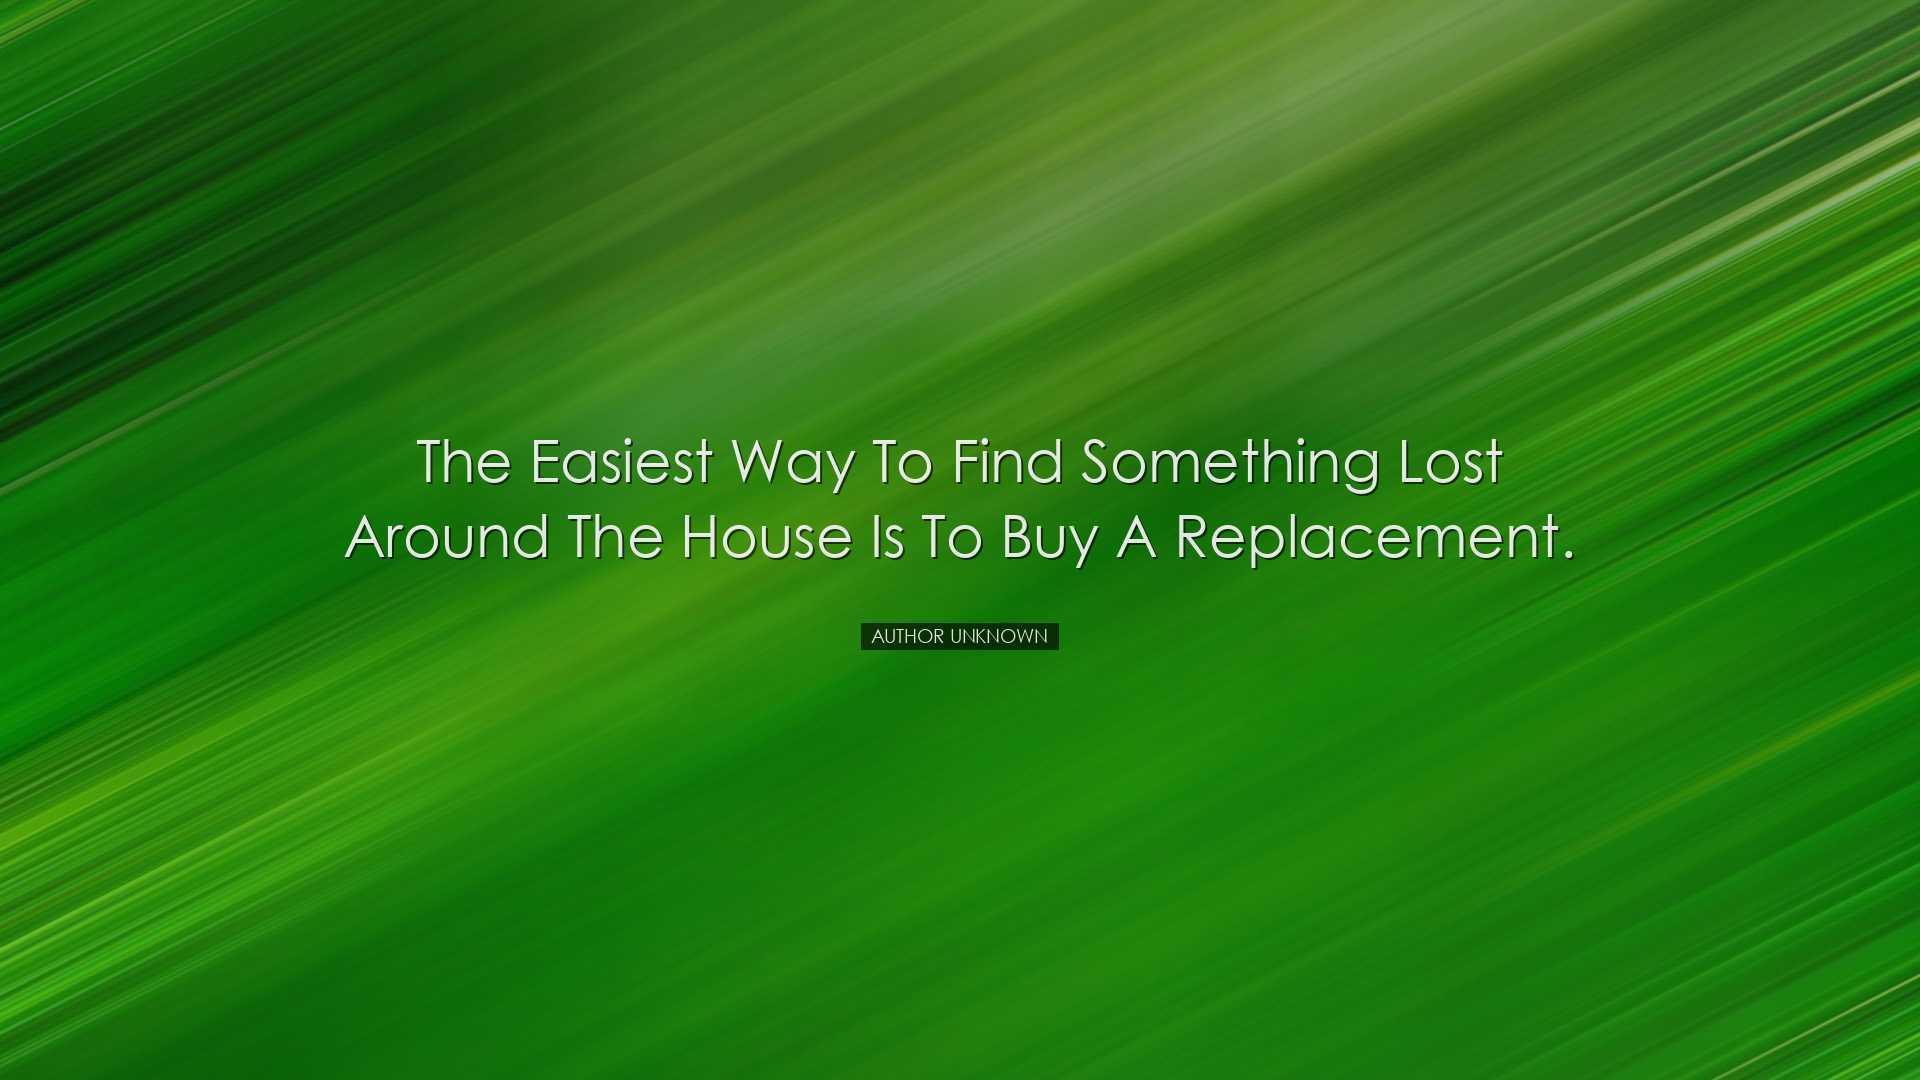 The easiest way to find something lost around the house is to buy